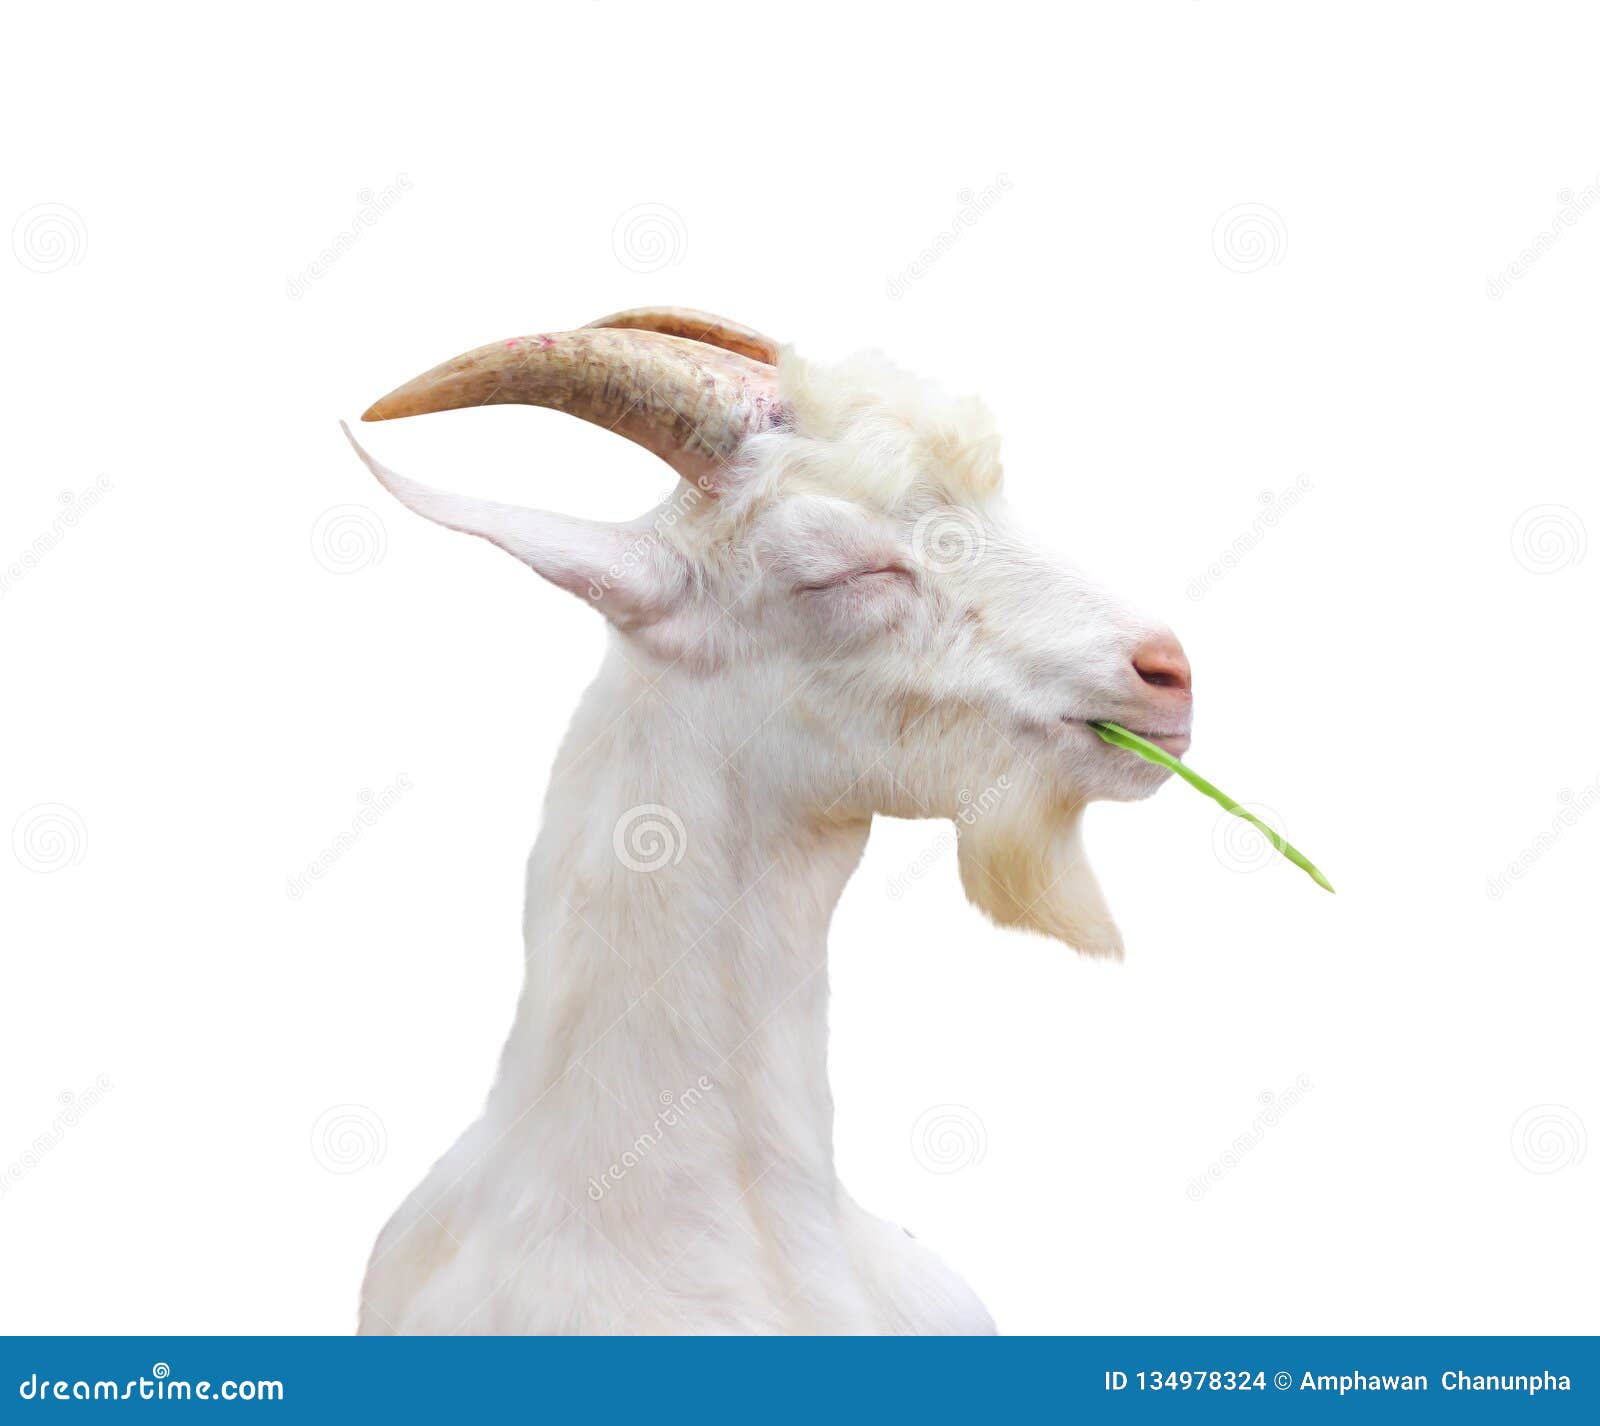 white goat standing closed eye and eating green grass with happy face  on white background ,clipping path,apra aegagrus